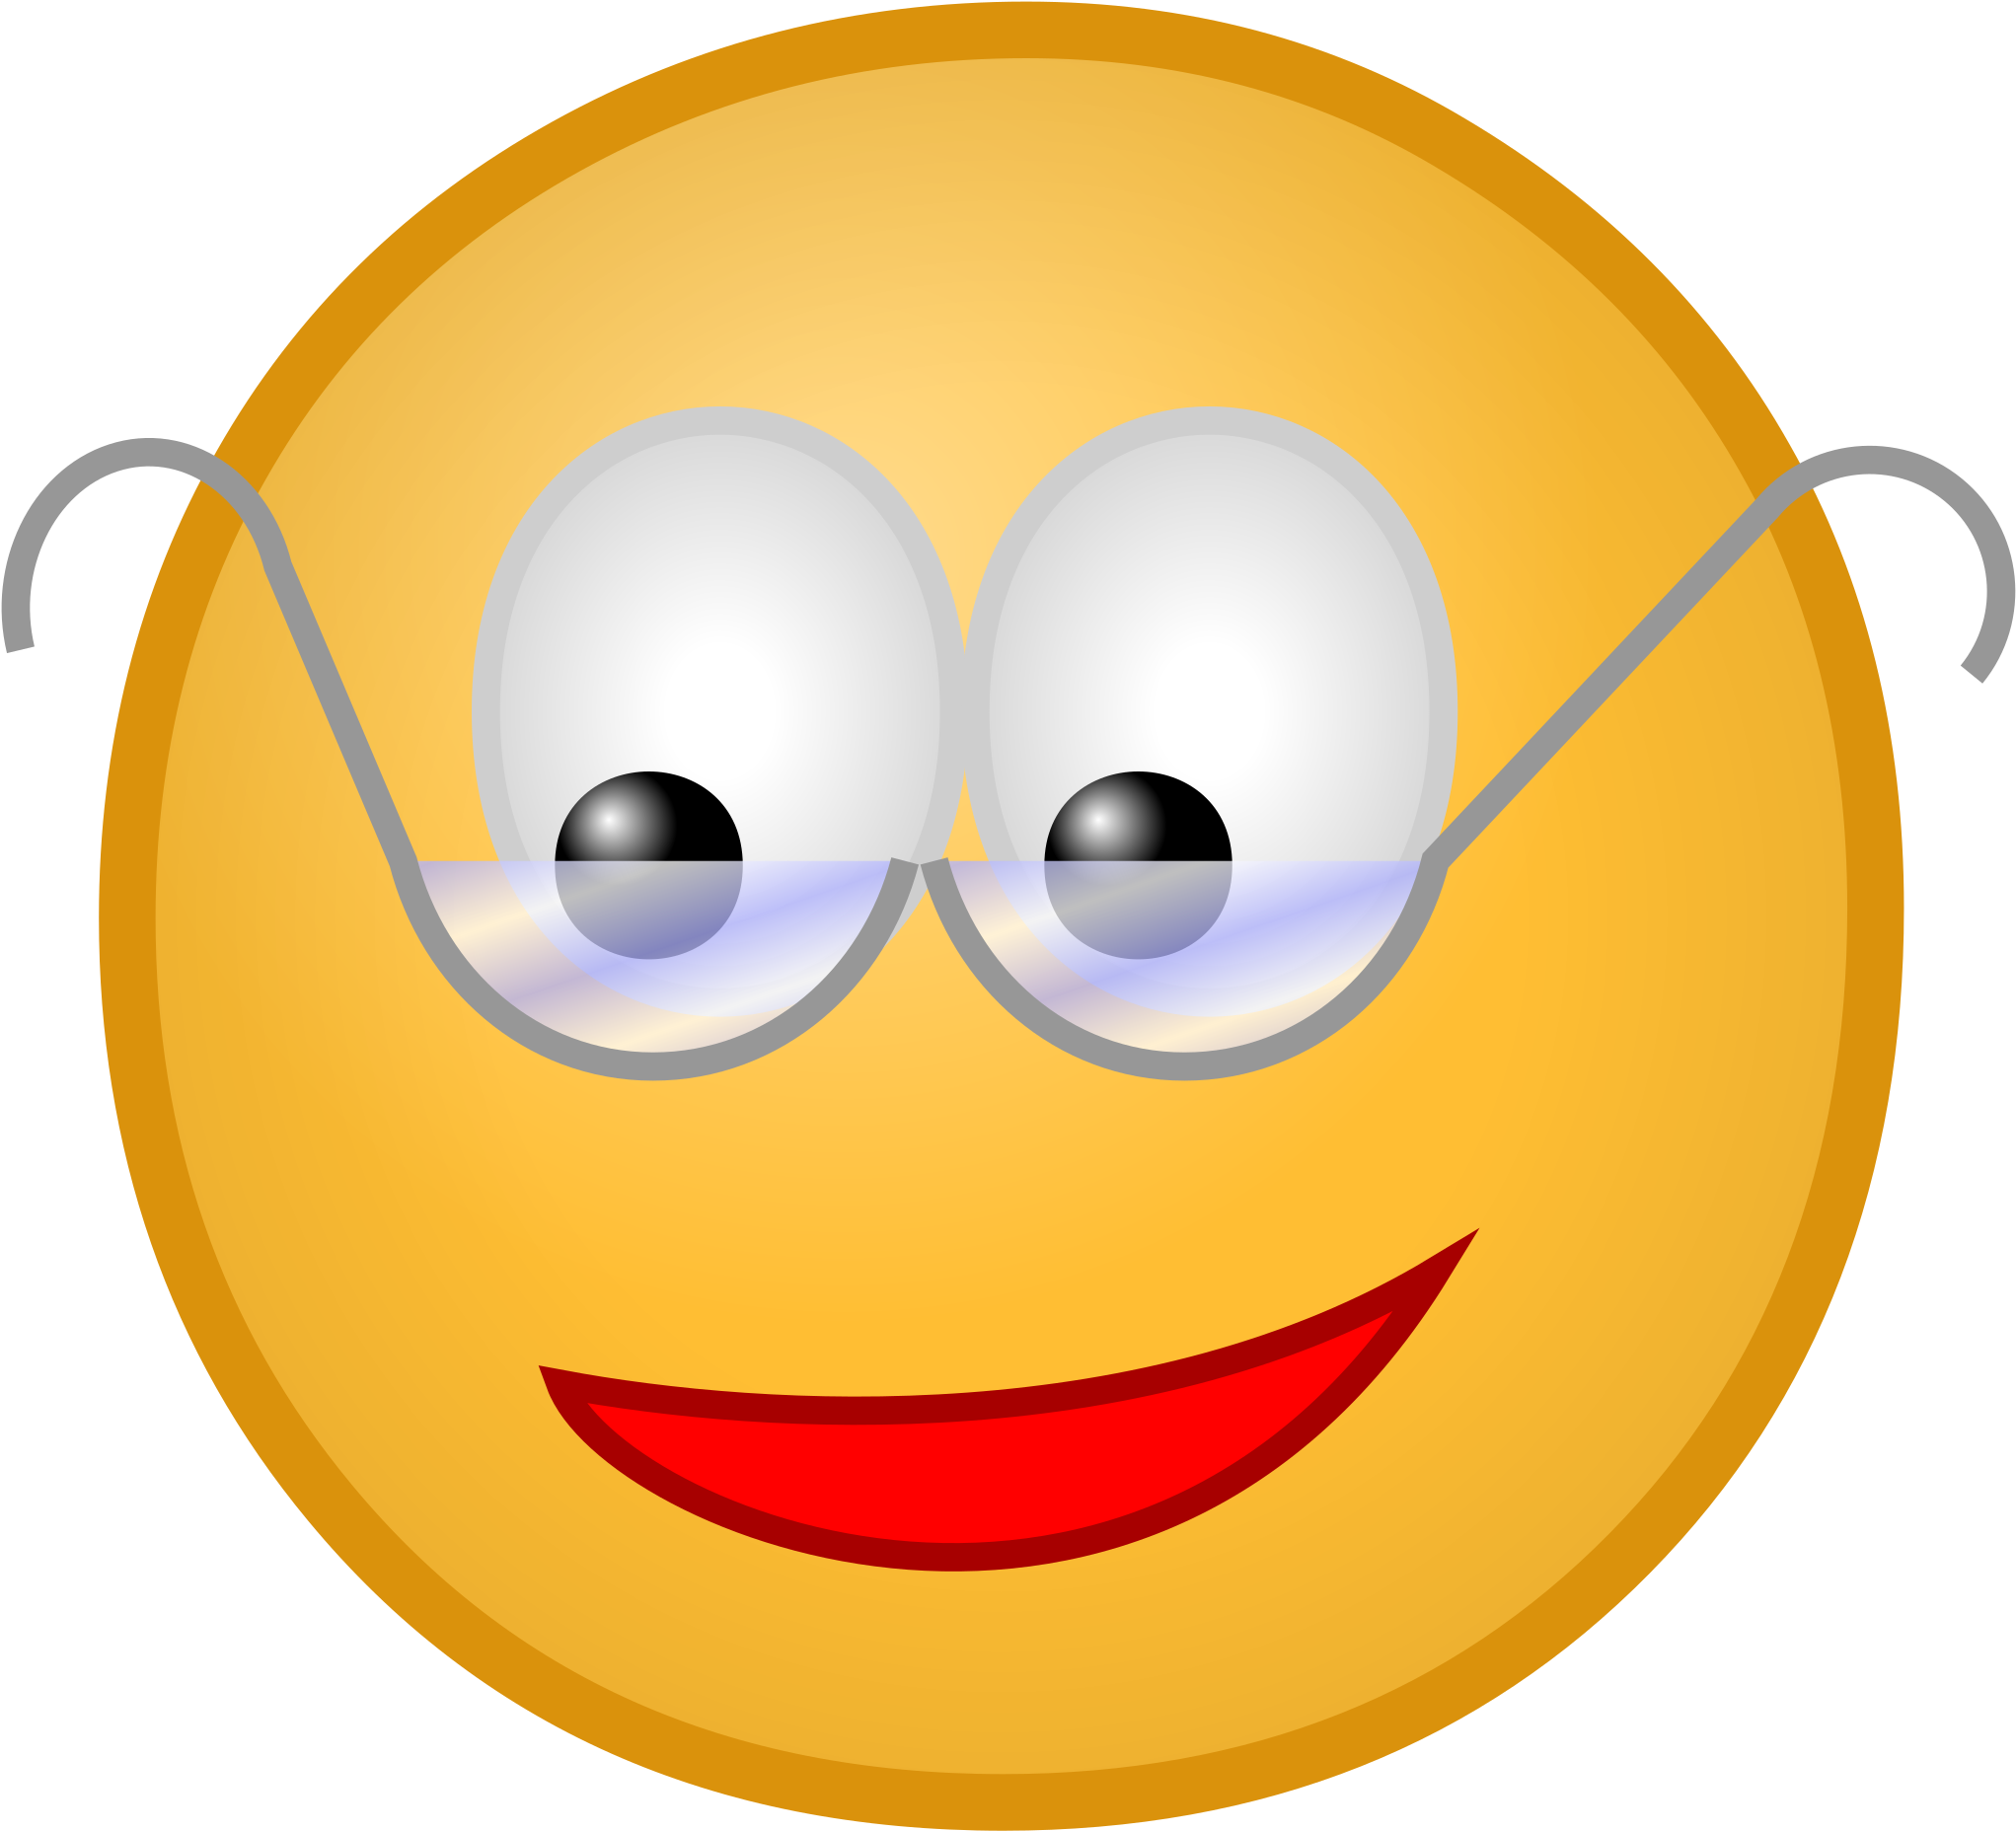 This Free Icons Png Design Of Smiley With Glasses - Smiley Face With Gl...